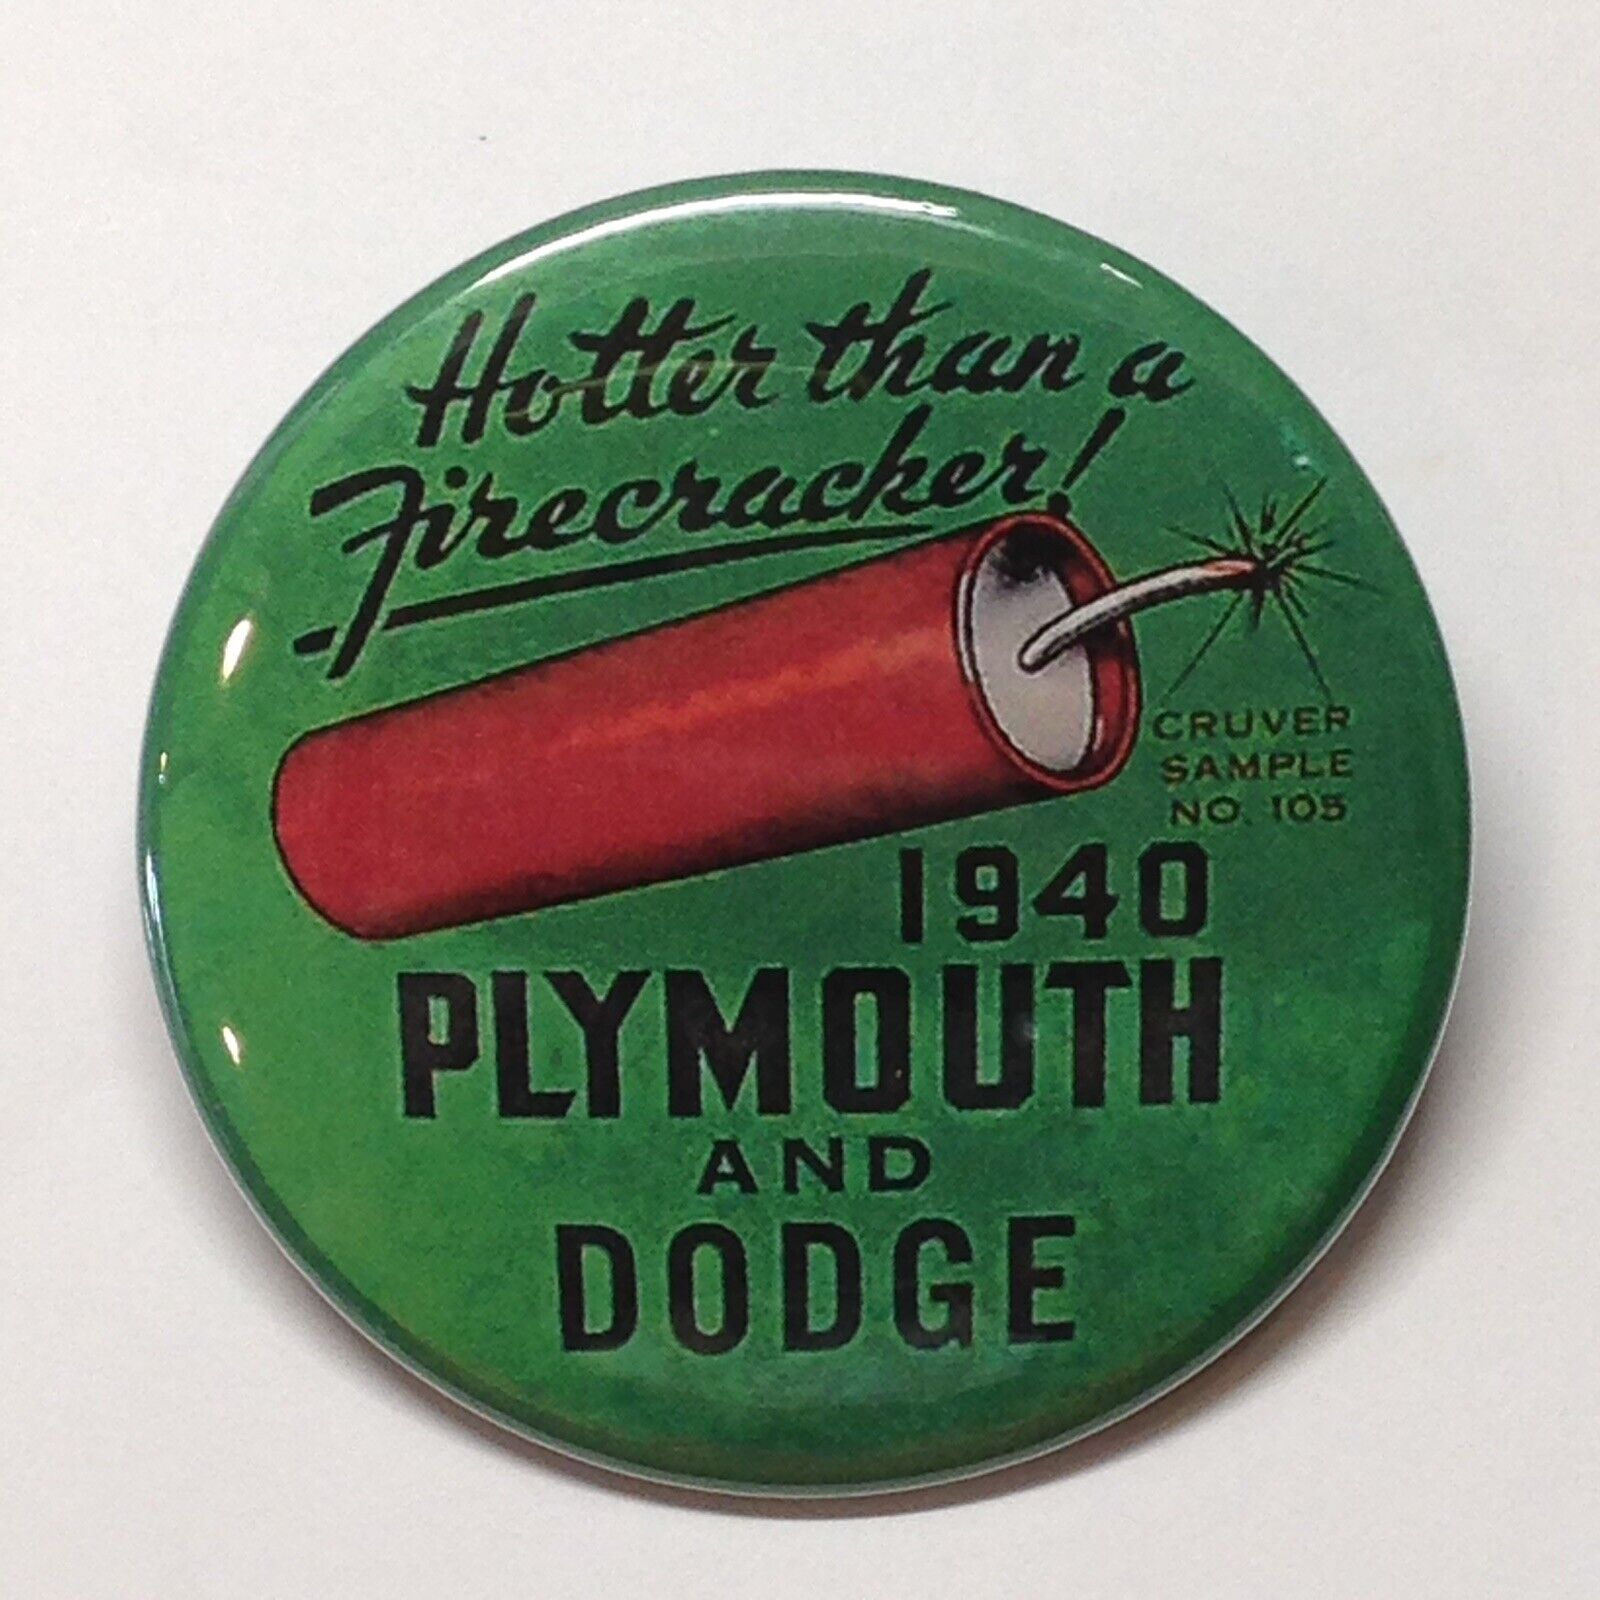 1940 Plymouth Dodge Advertising Pocket Mirror Vintage Style